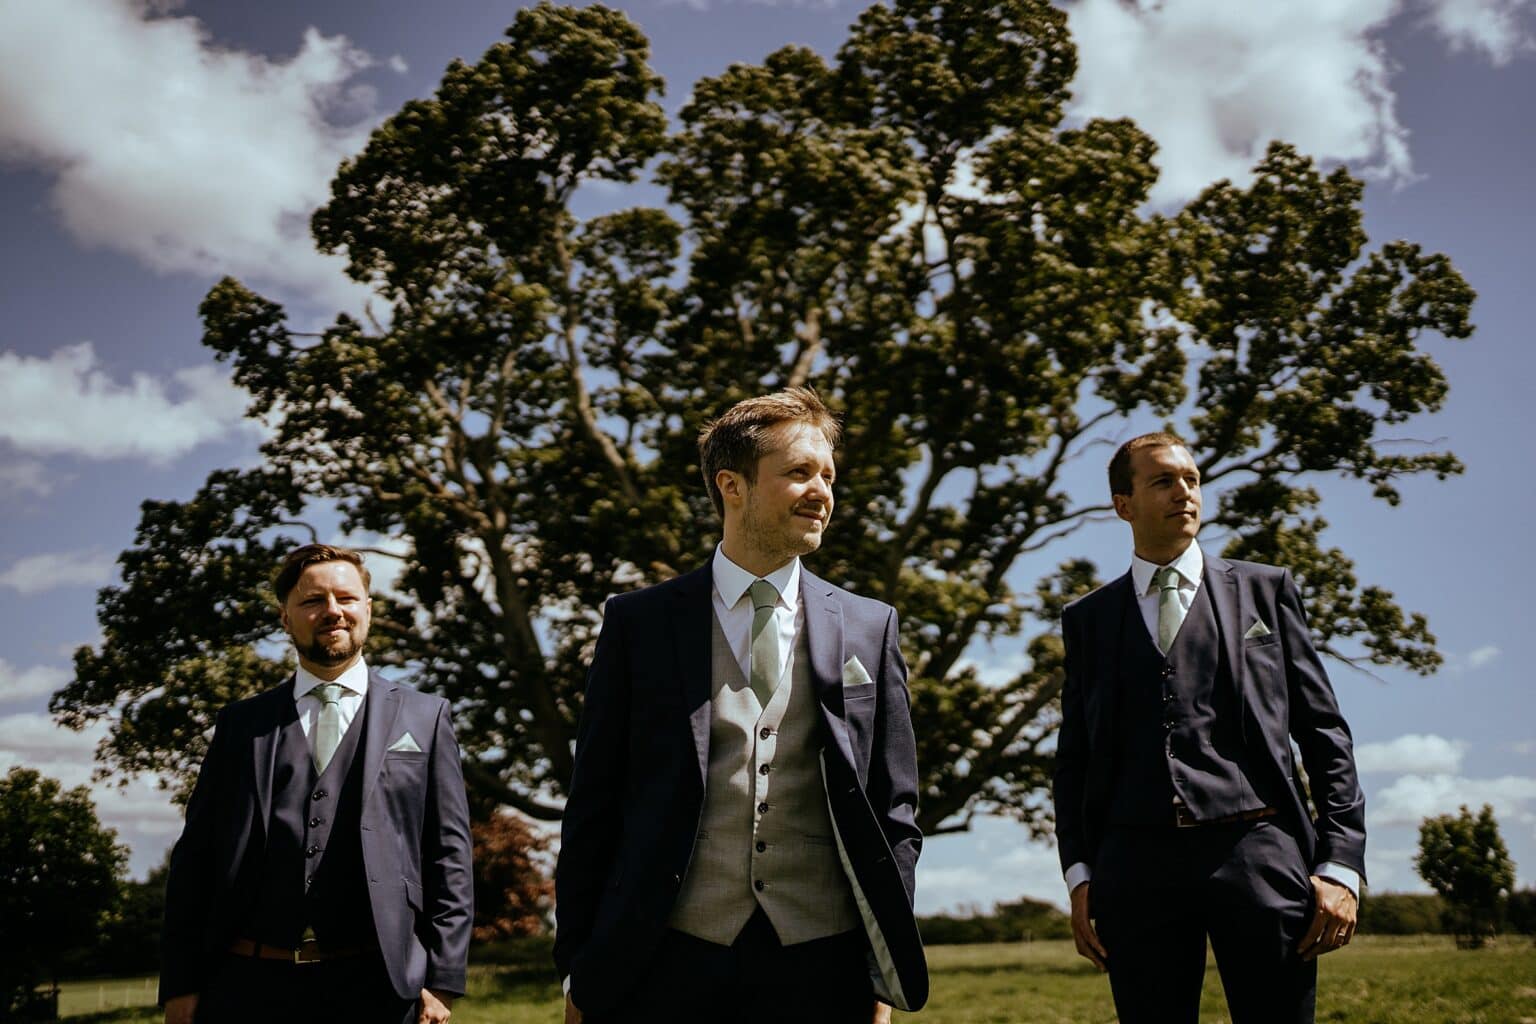 groomsmen standing to the side and behind the groom with big green tree and blue skies in background exclusive use colstoun house wedding unique wedding venue scotland